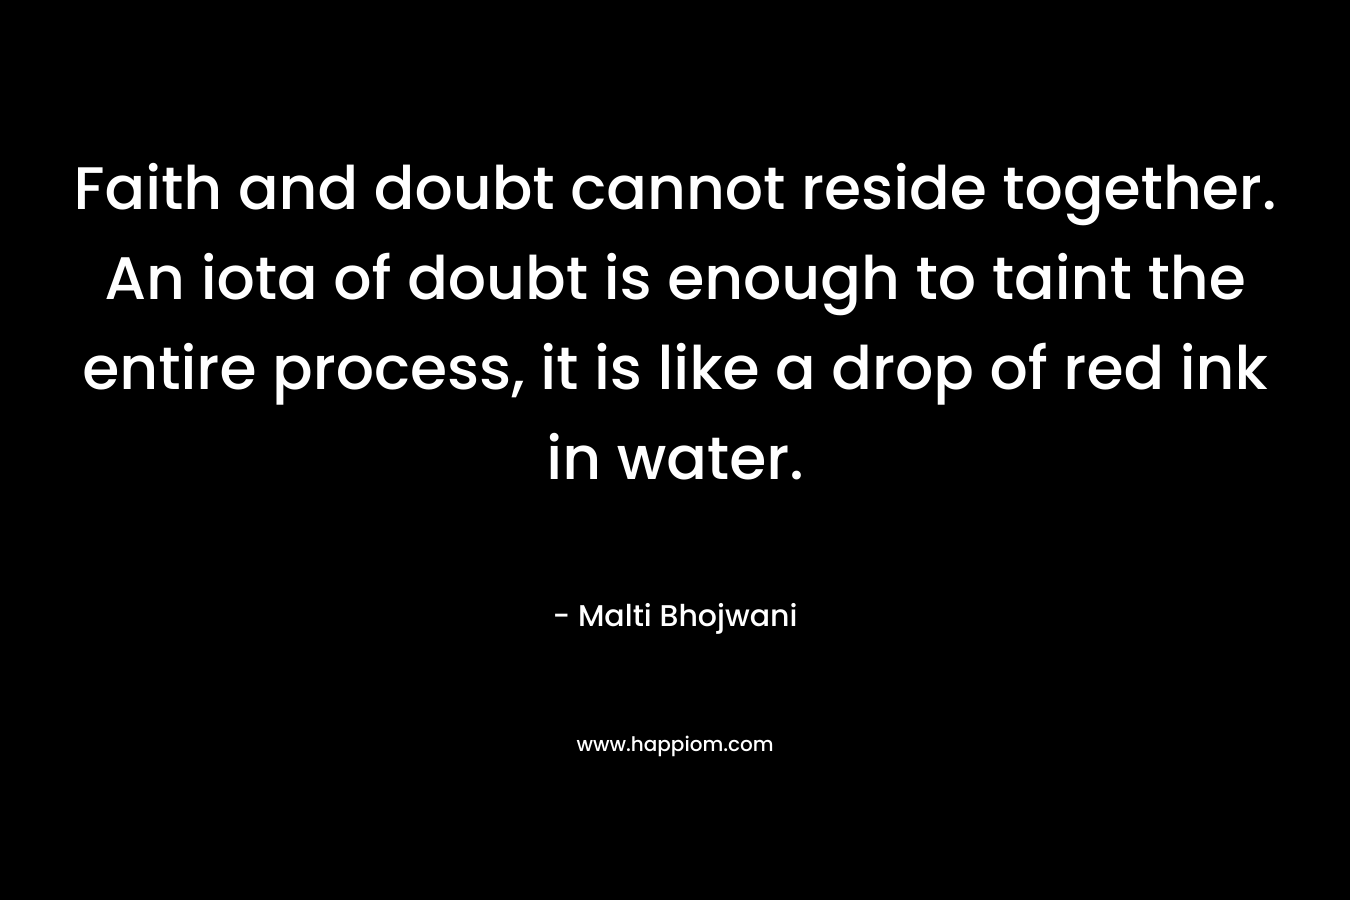 Faith and doubt cannot reside together. An iota of doubt is enough to taint the entire process, it is like a drop of red ink in water.